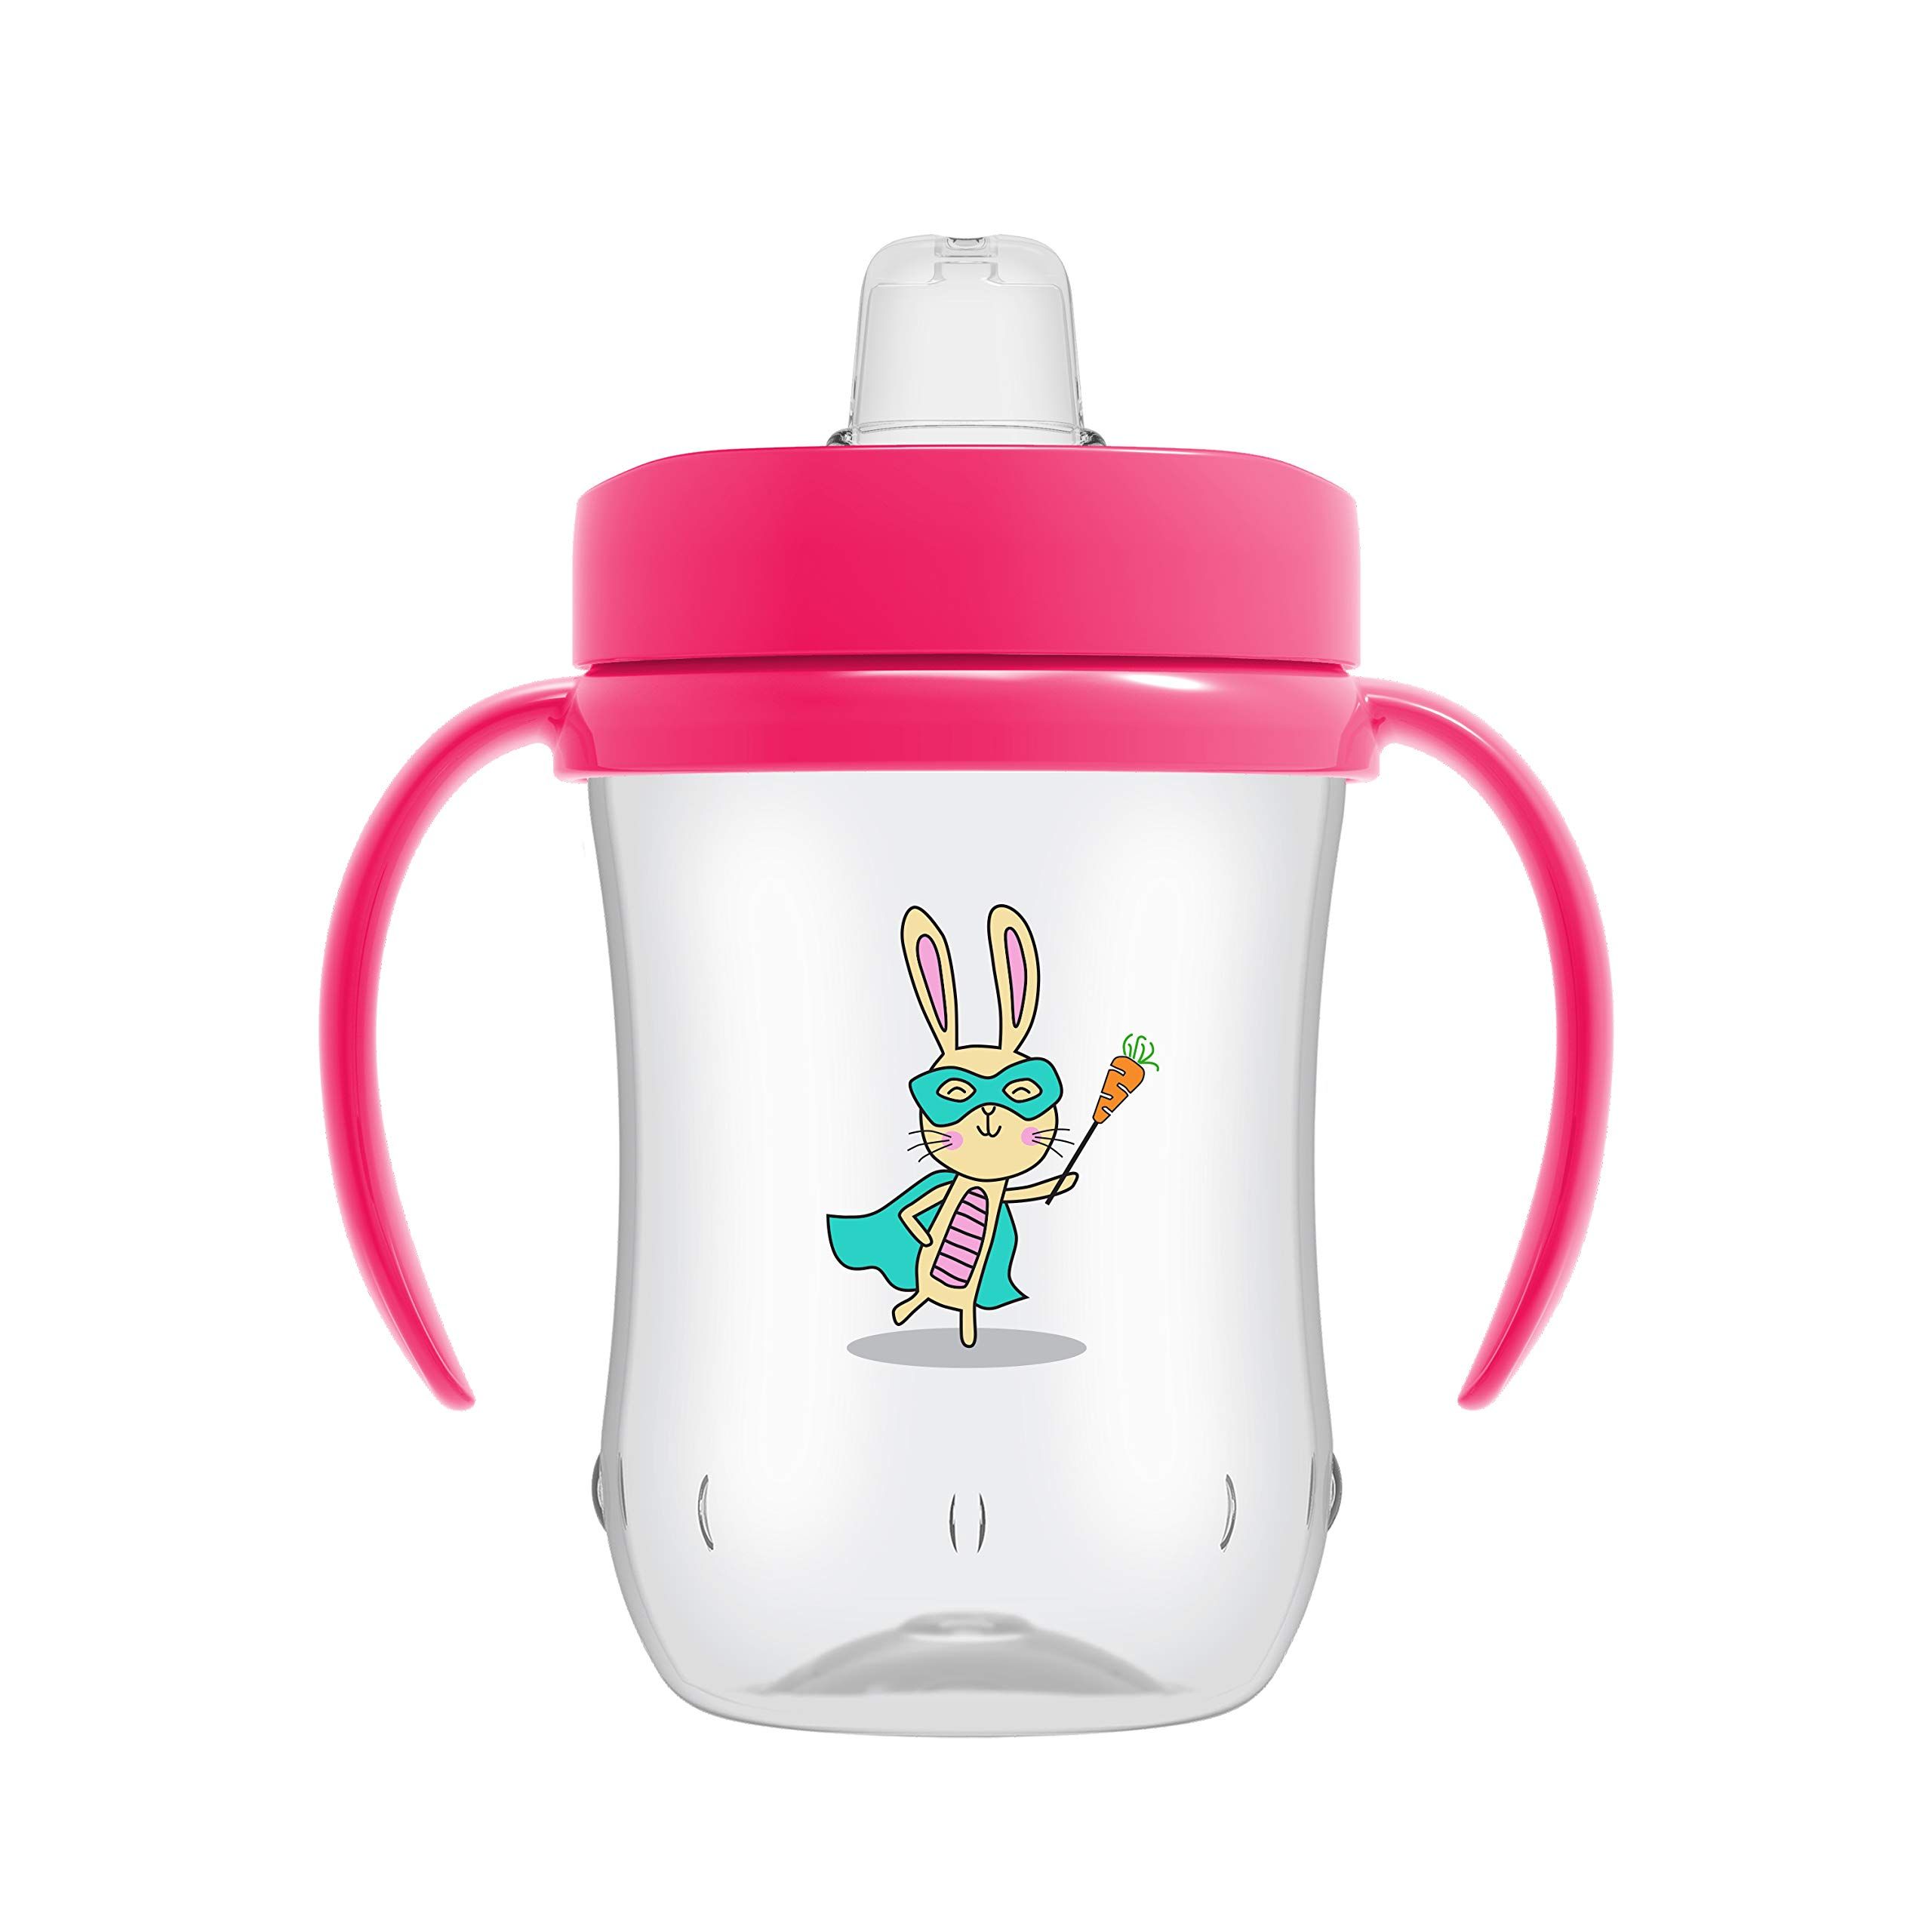 Dr. Brown’s Milestones Soft Spout Sippy Cup with Handles - Pink - 9oz - 6m+ | Amazon (US)